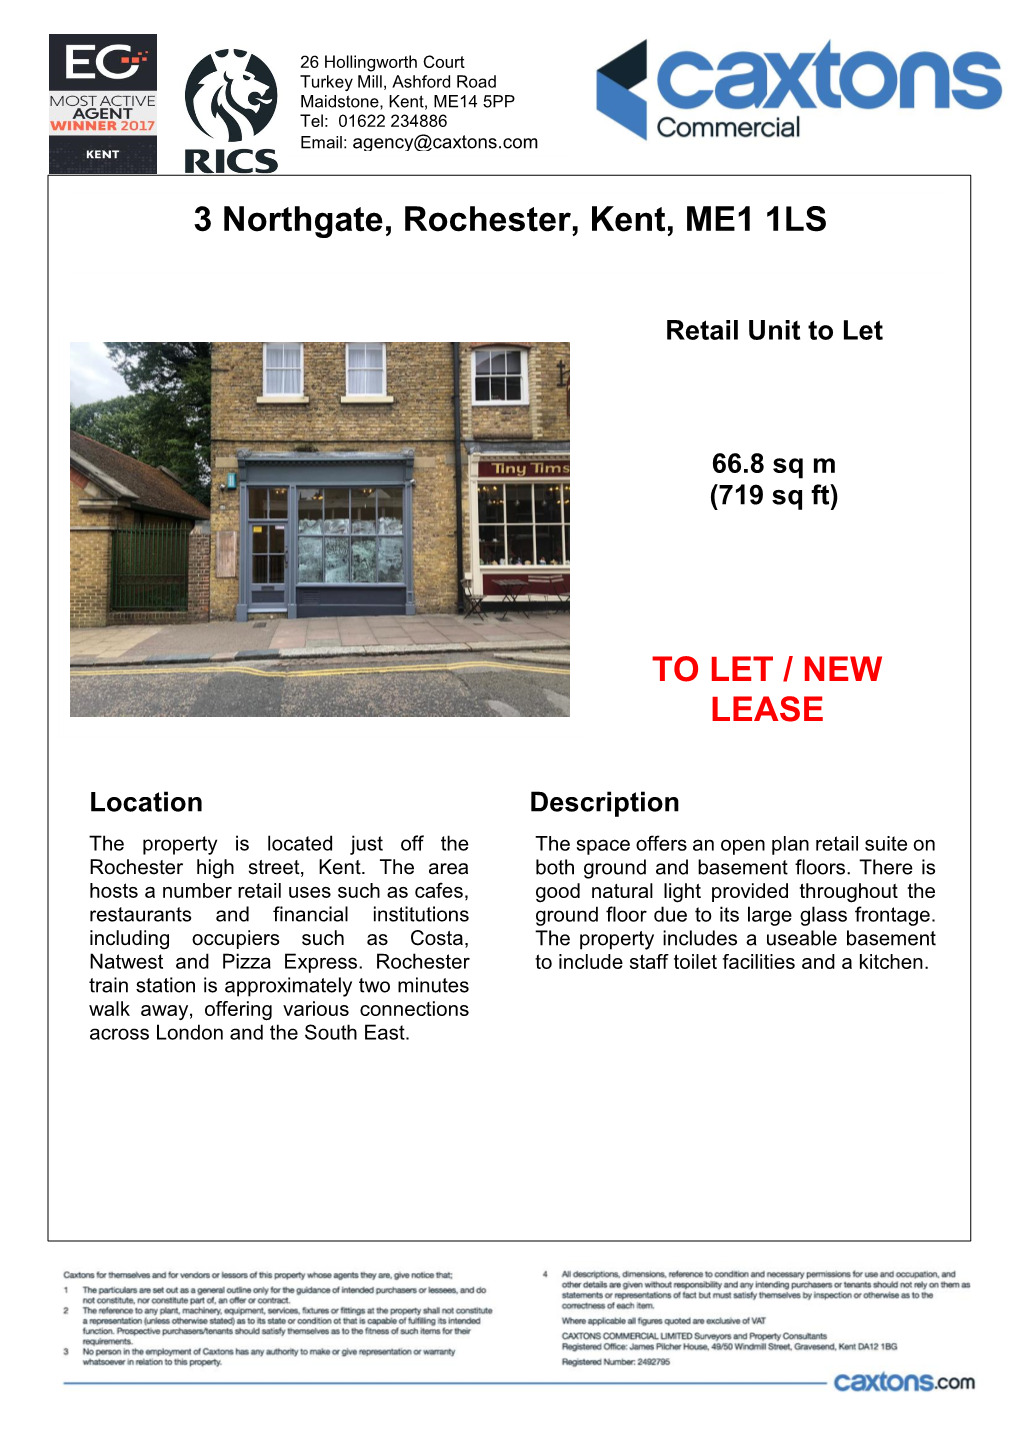 3 Northgate, Rochester, Kent, ME1 1LS to LET / NEW LEASE